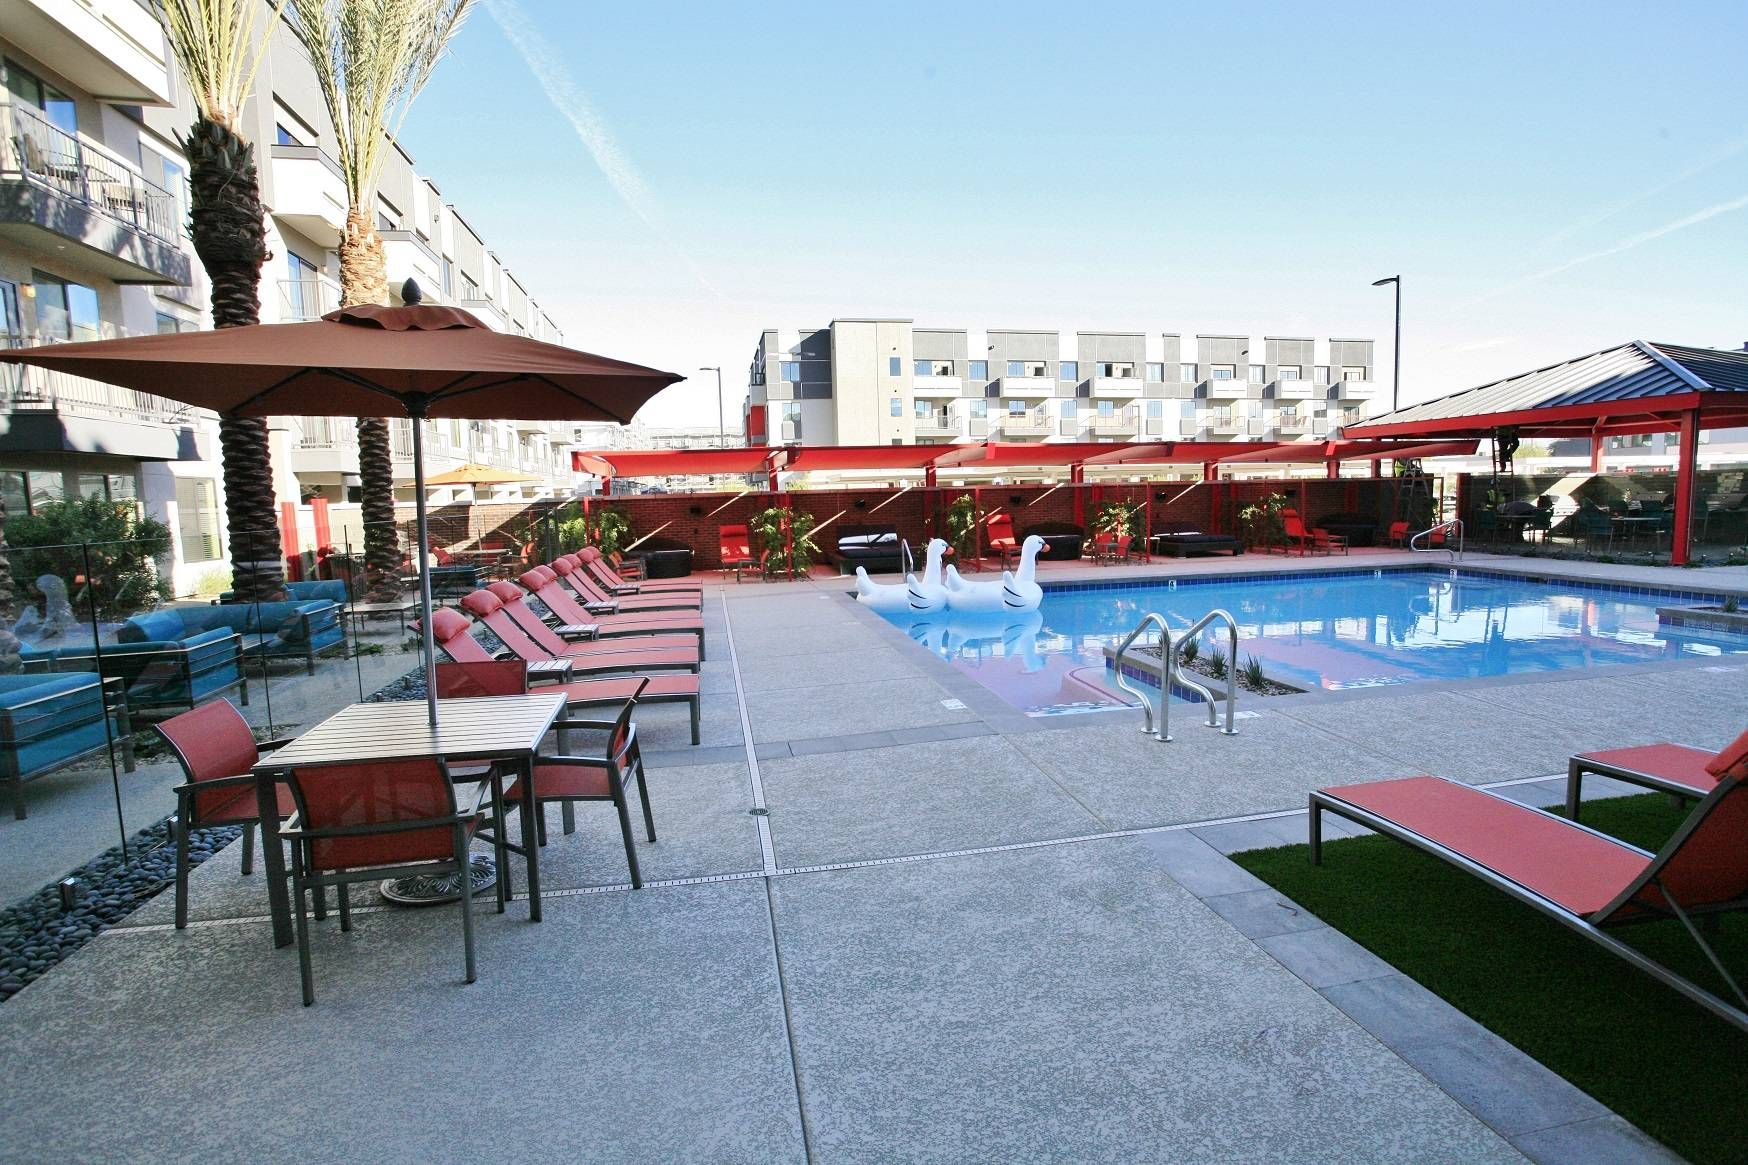 The pool area at Alta Steelyard Lofts, showcasing red sun loungers, palm trees, and a clear blue swimming pool.